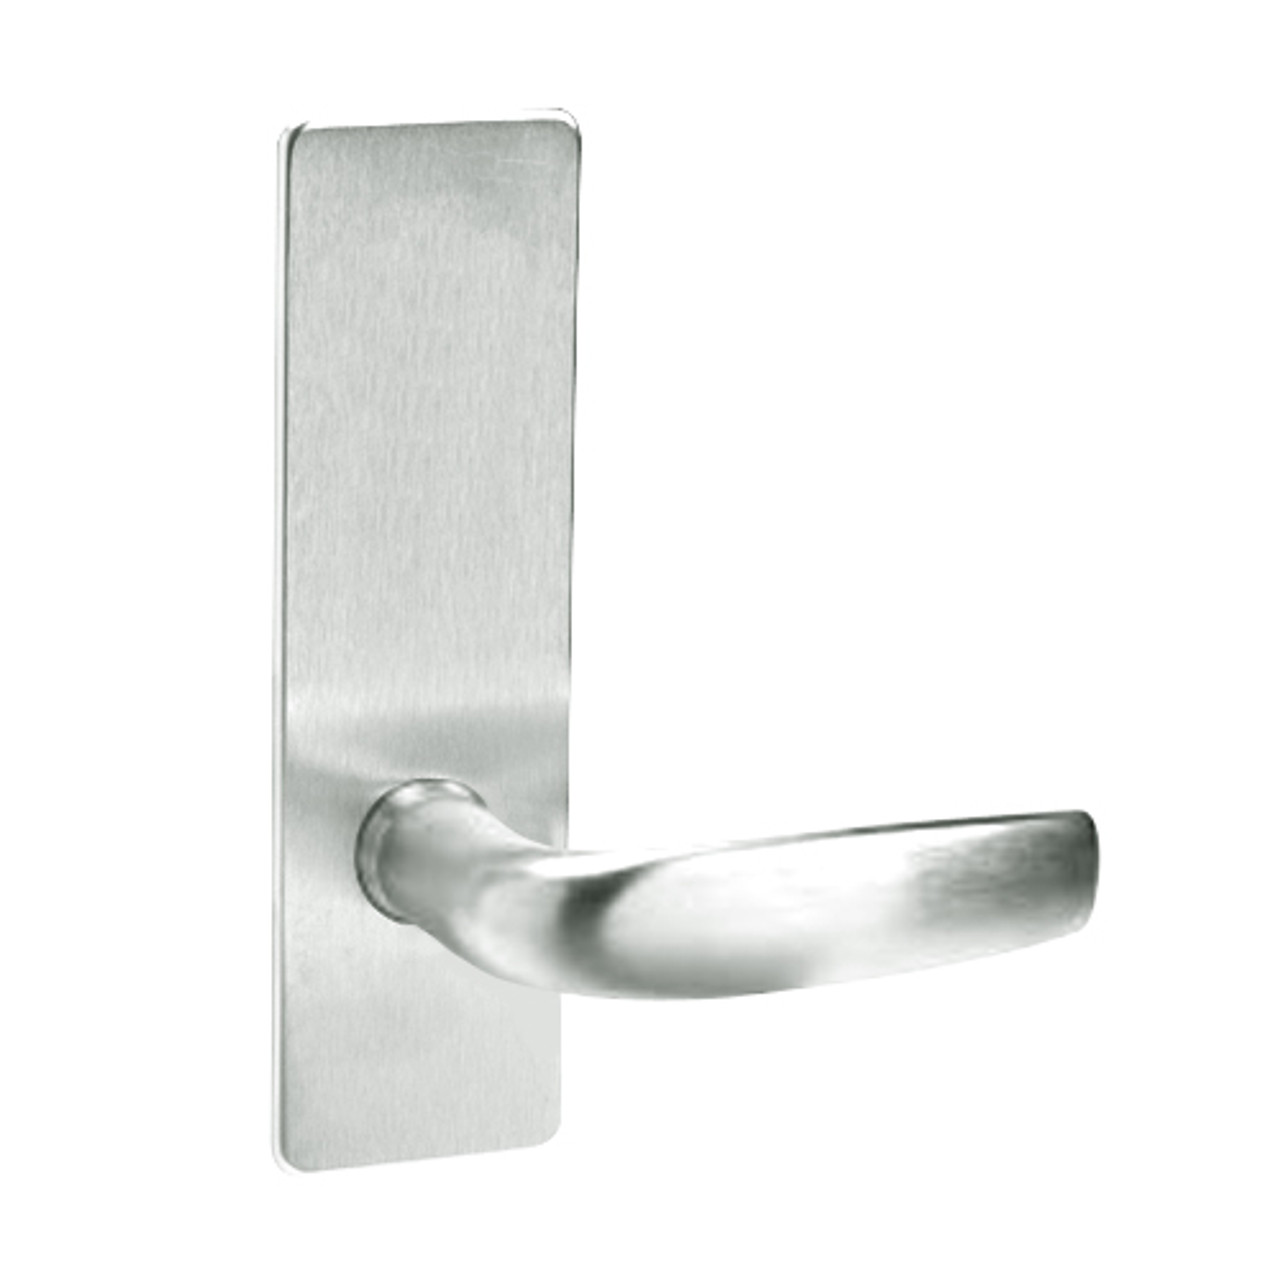 ML2030-CSN-618-M31 Corbin Russwin ML2000 Series Mortise Privacy Locksets with Citation Lever in Bright Nickel